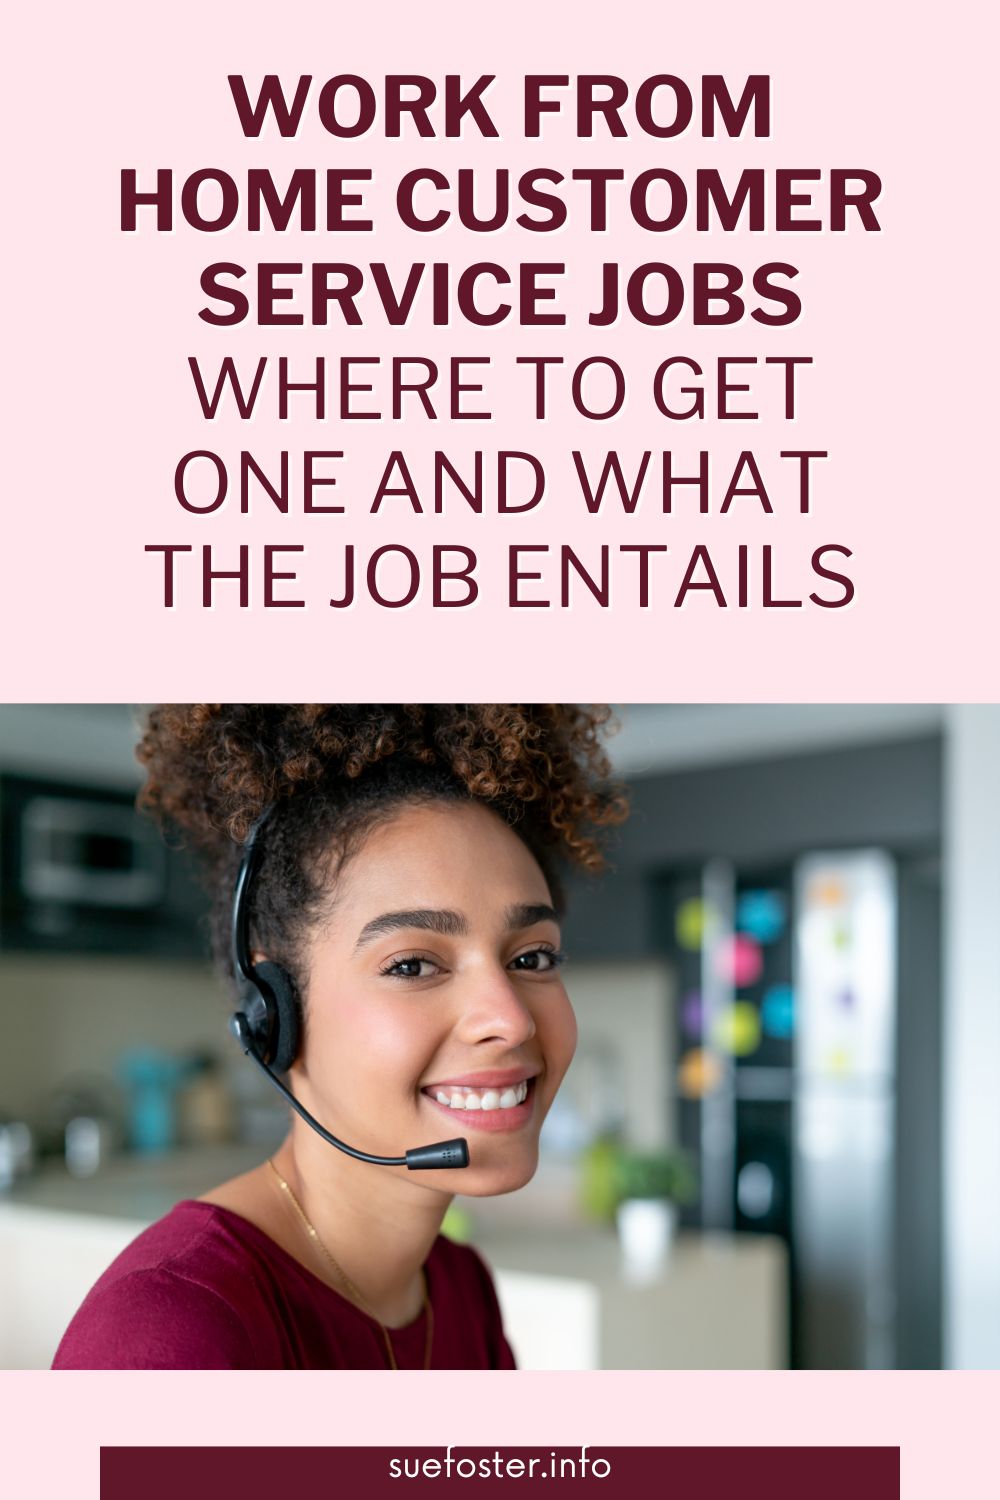 Explore work-from-home customer service jobs, offering benefits for businesses & employees. Find job sources & prep tips for a balanced work-life.